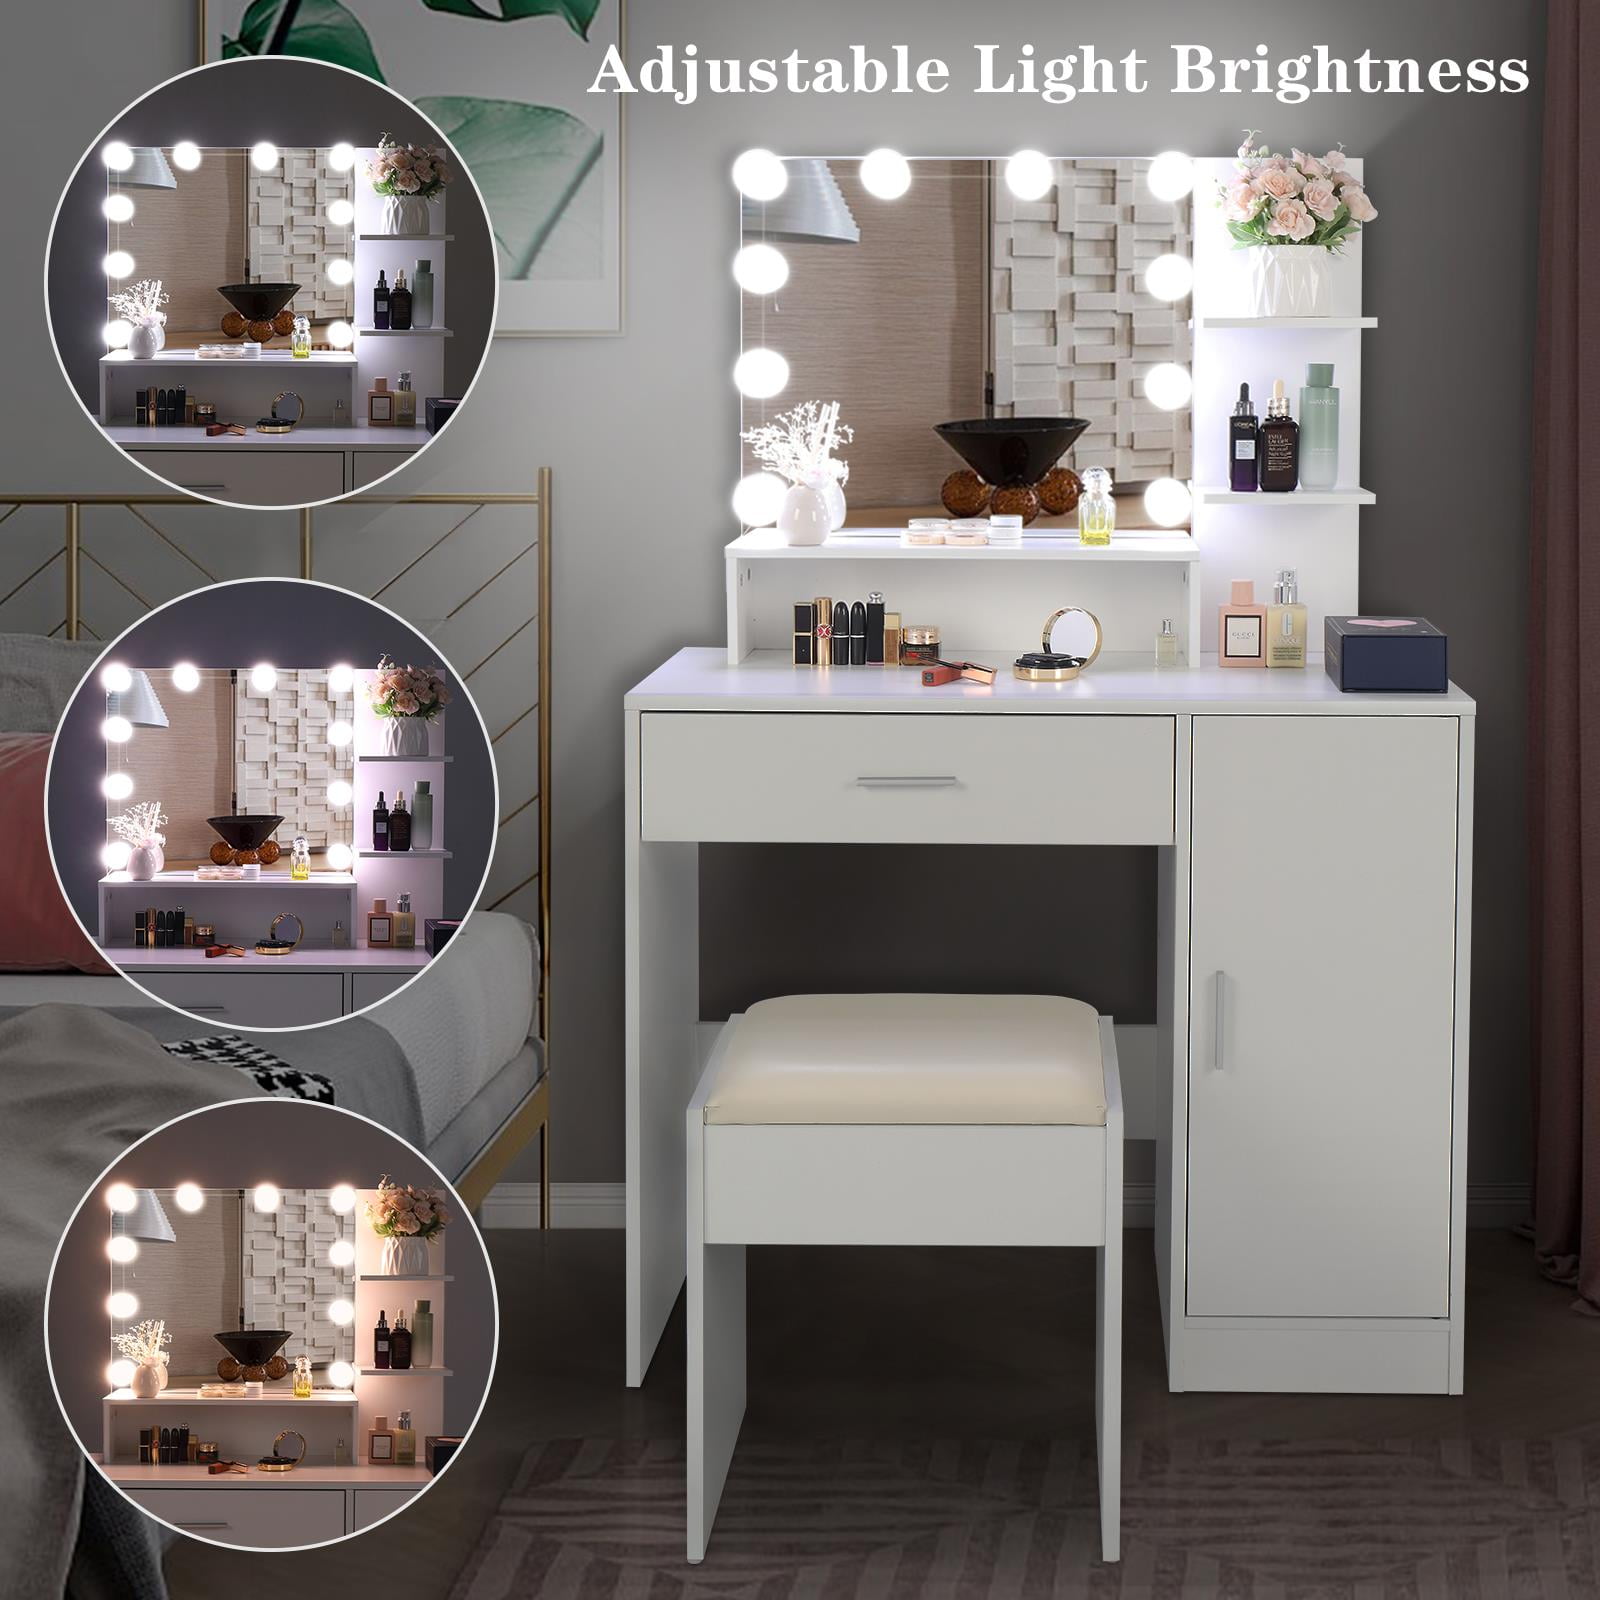 3 Color Modes，Adjustable Brightness，White Vanity Makeup Table Chair Set，4 Drawers Makeup Table with Padded Stool Dressing Table with LED Light Mirror